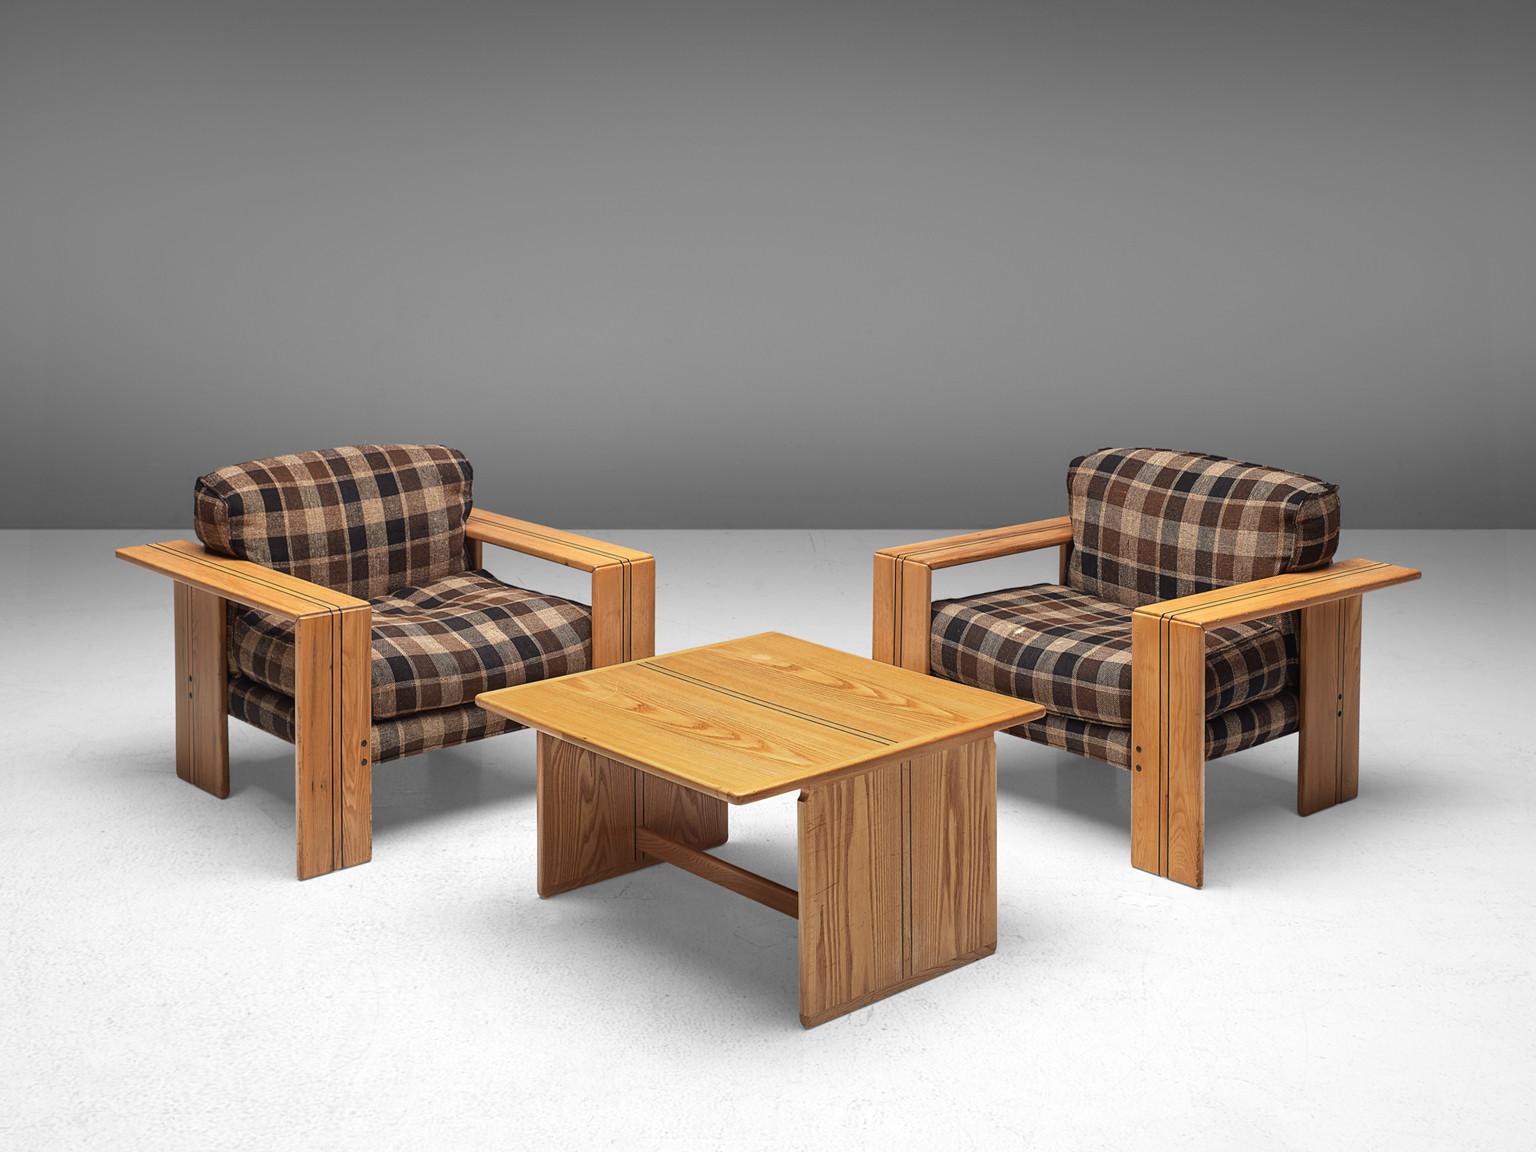 Afra & Tobia Scarpa Pair of 'Artona' Lounge Chairs in Elm and Checkered Fabric  1